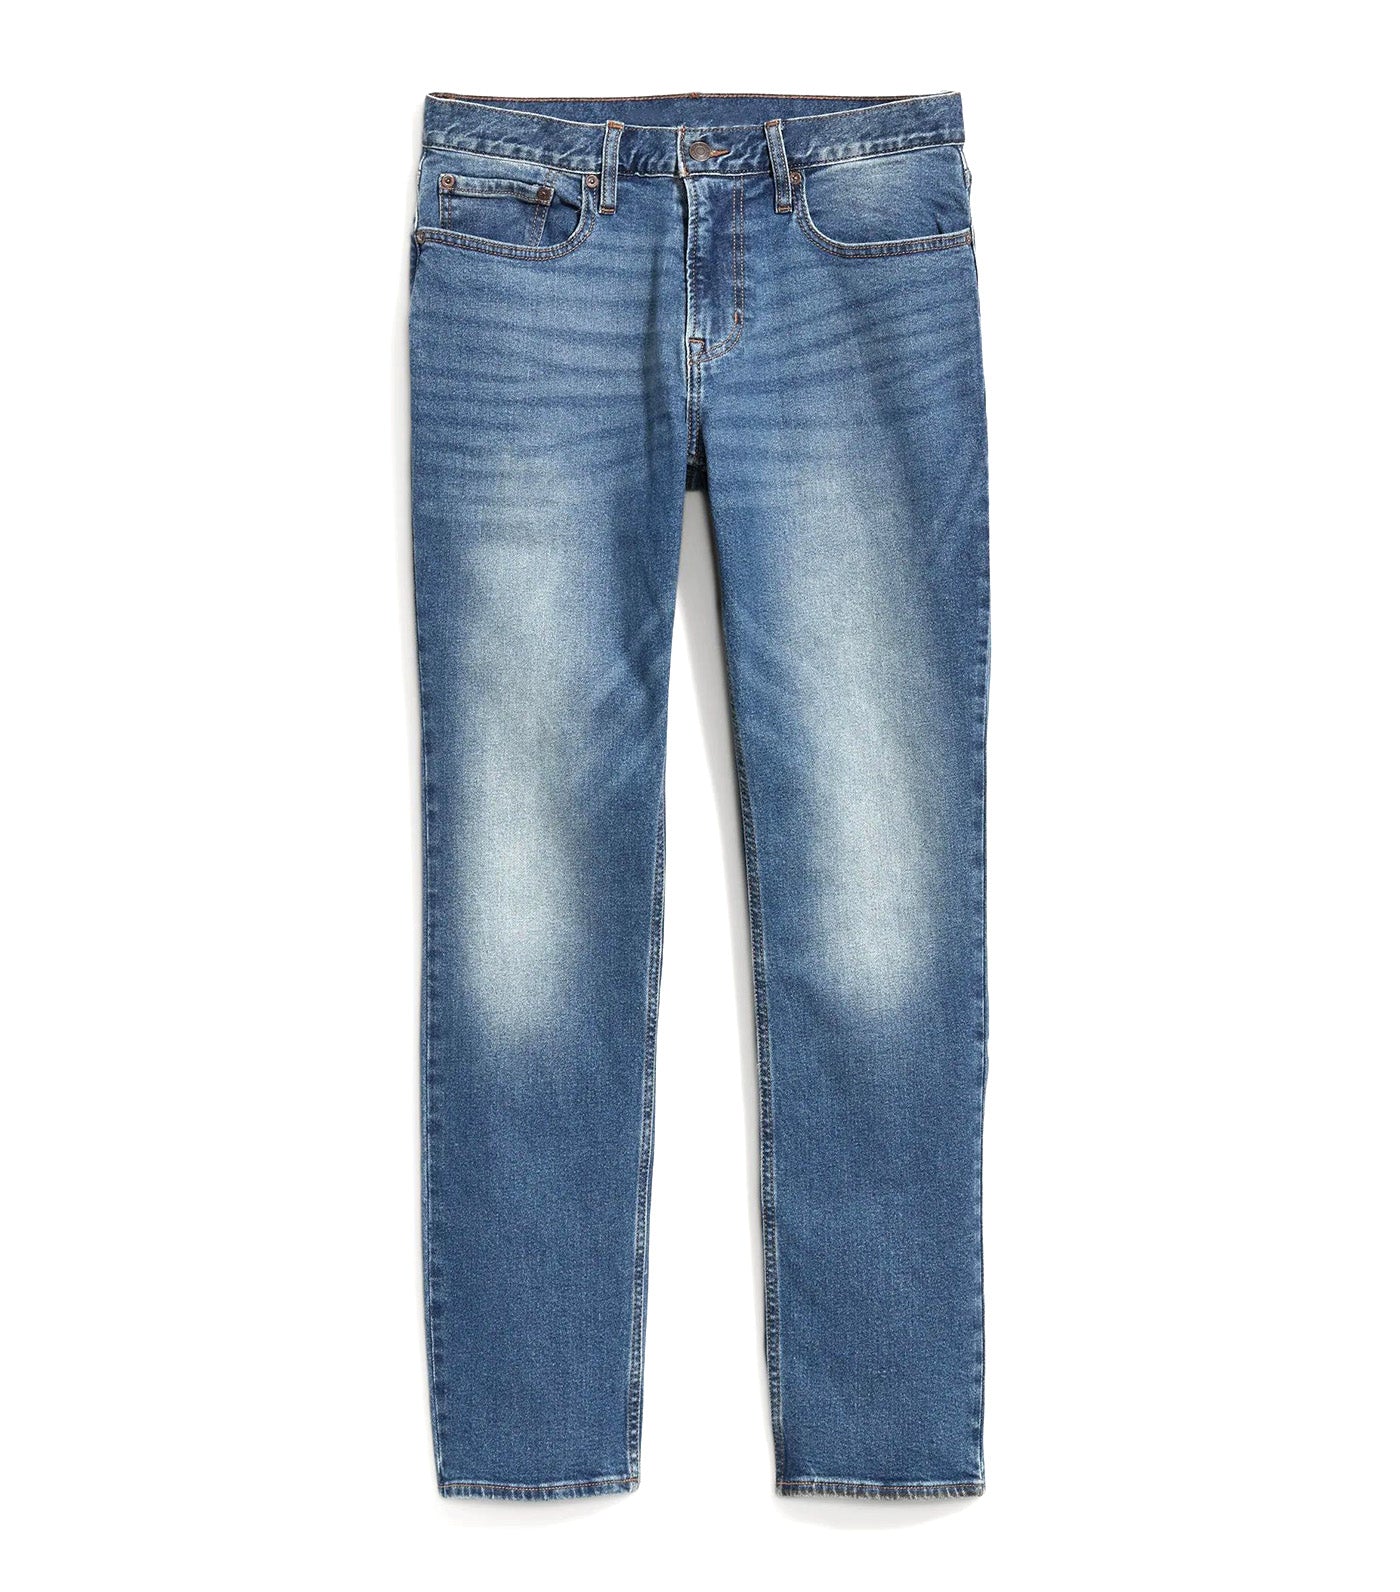 Straight Built-In Flex Jeans for Men Light Wash with Tint